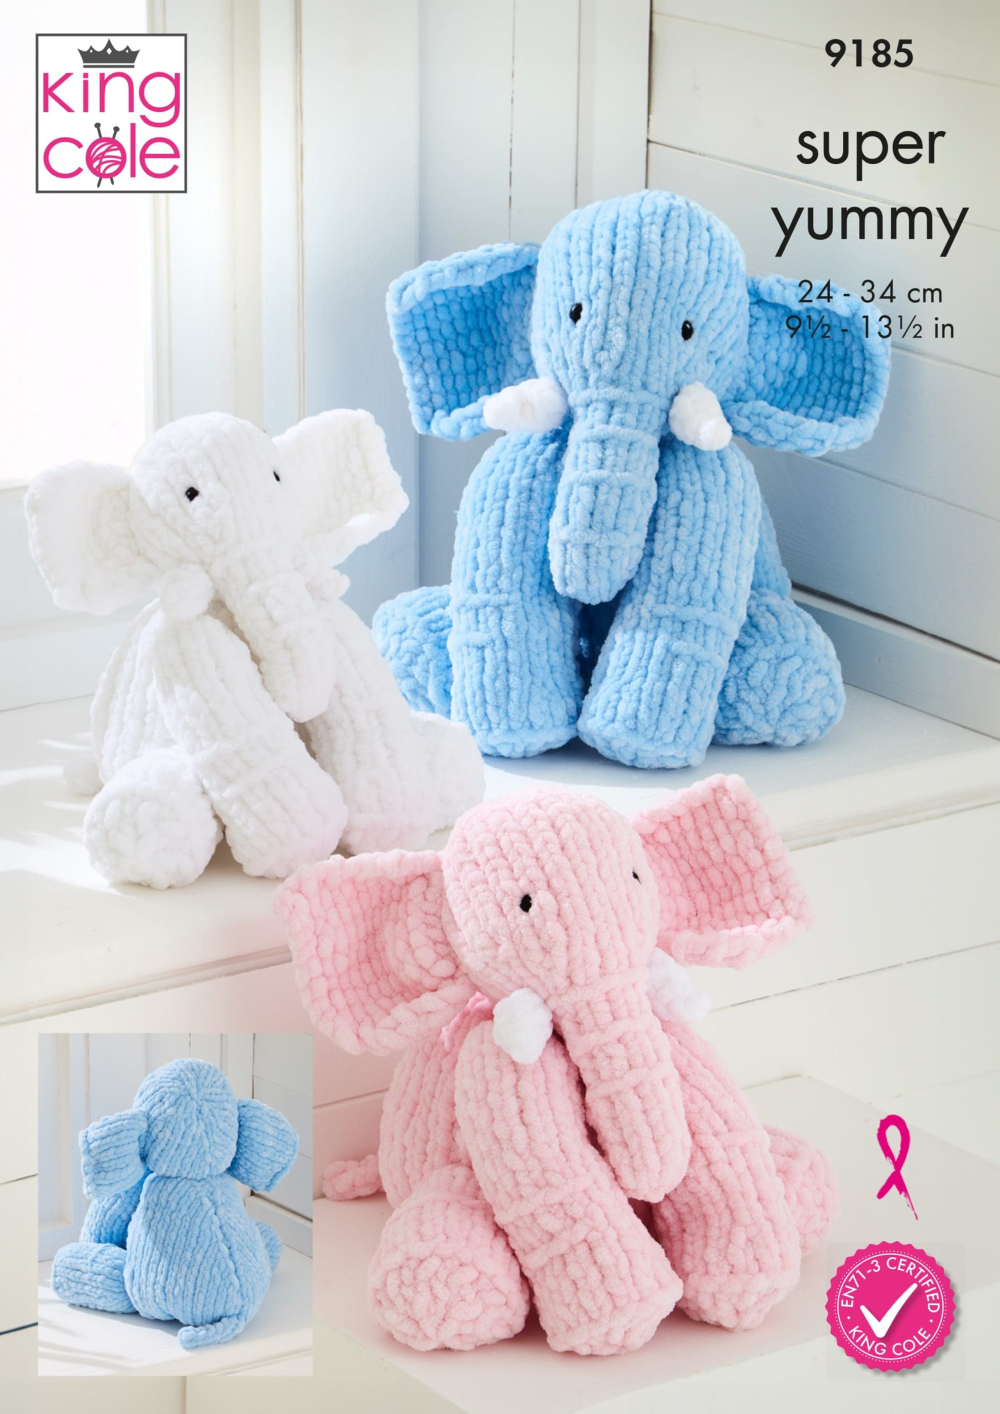 Knitting Pattern 9185 - Elephant Toys Knitted in Super Yummy